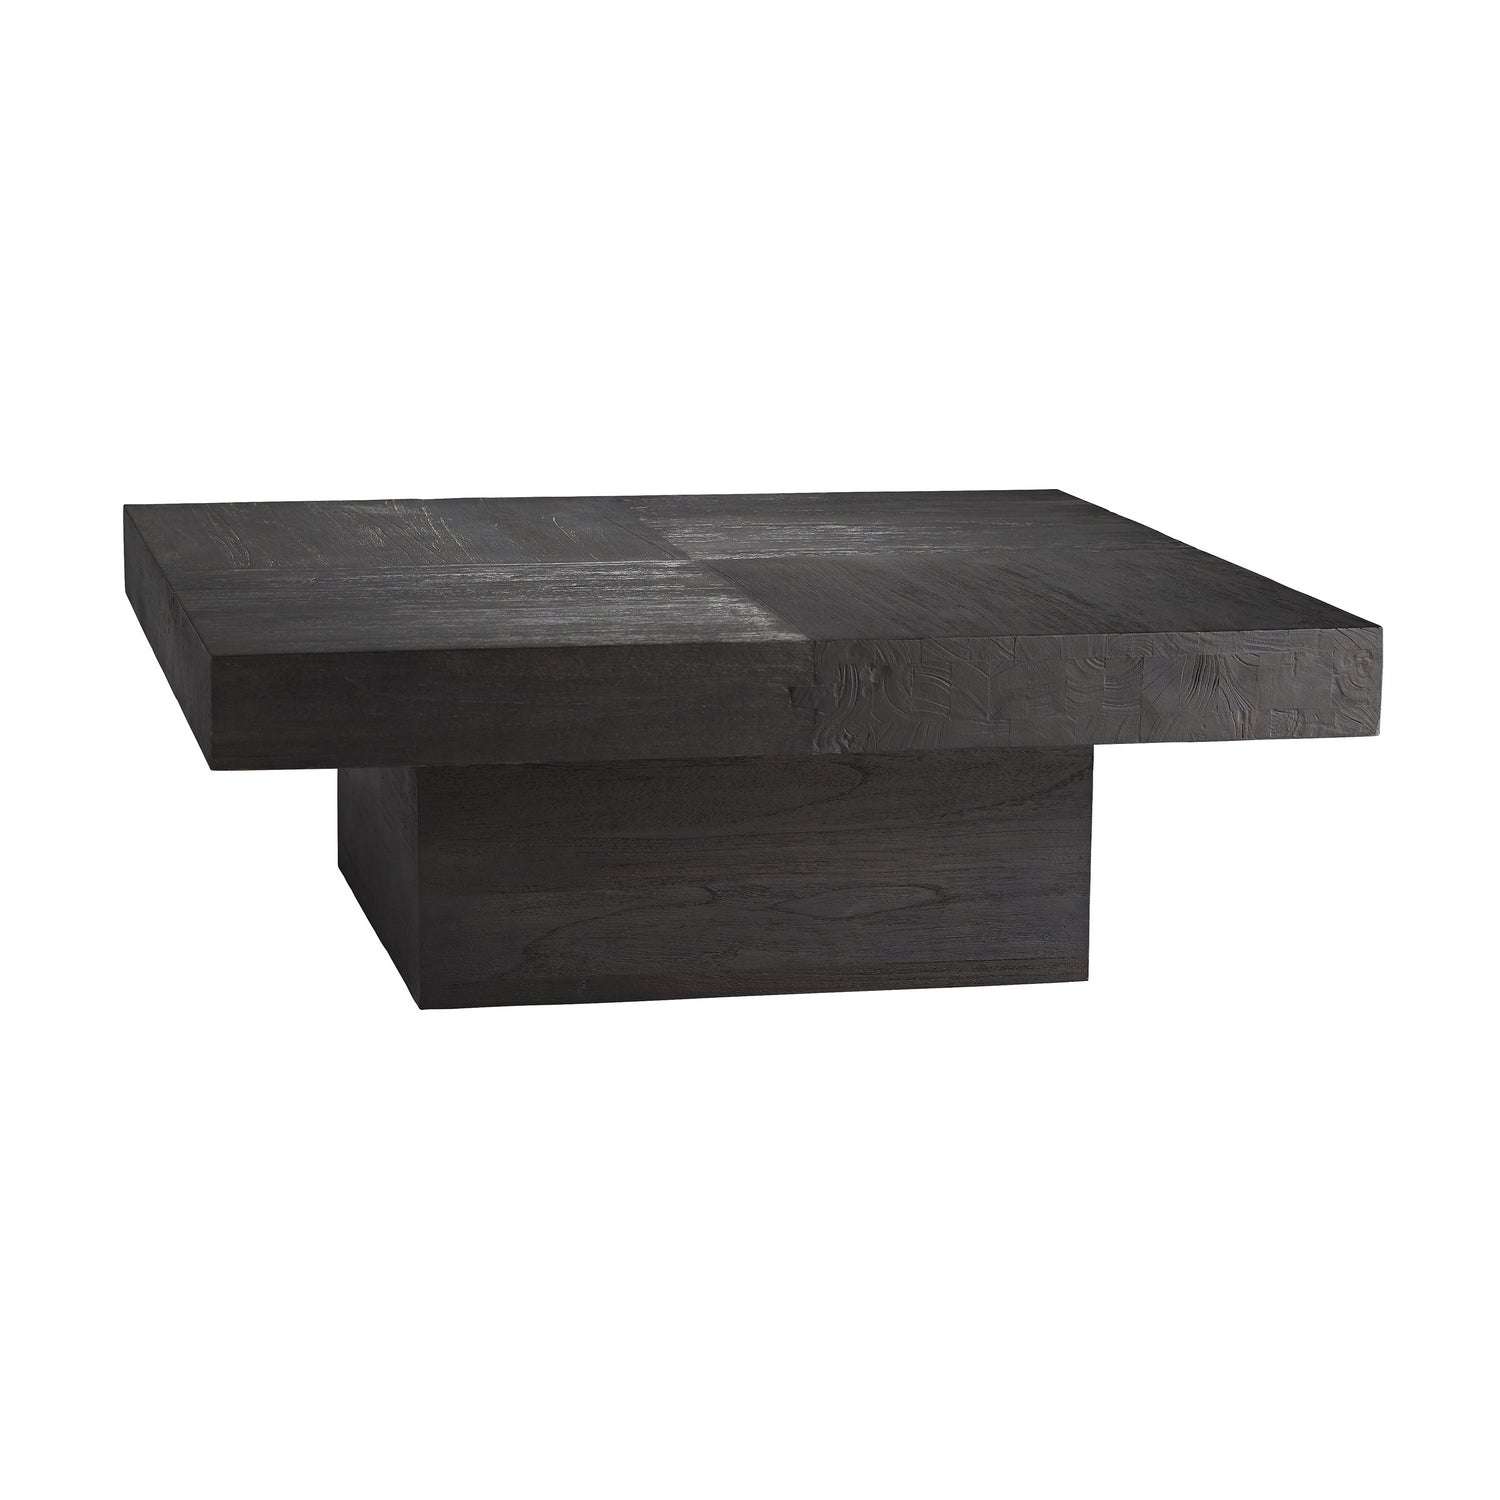 Cocktail Table from the Campbell collection in Sandblasted Soft Black Waxed finish